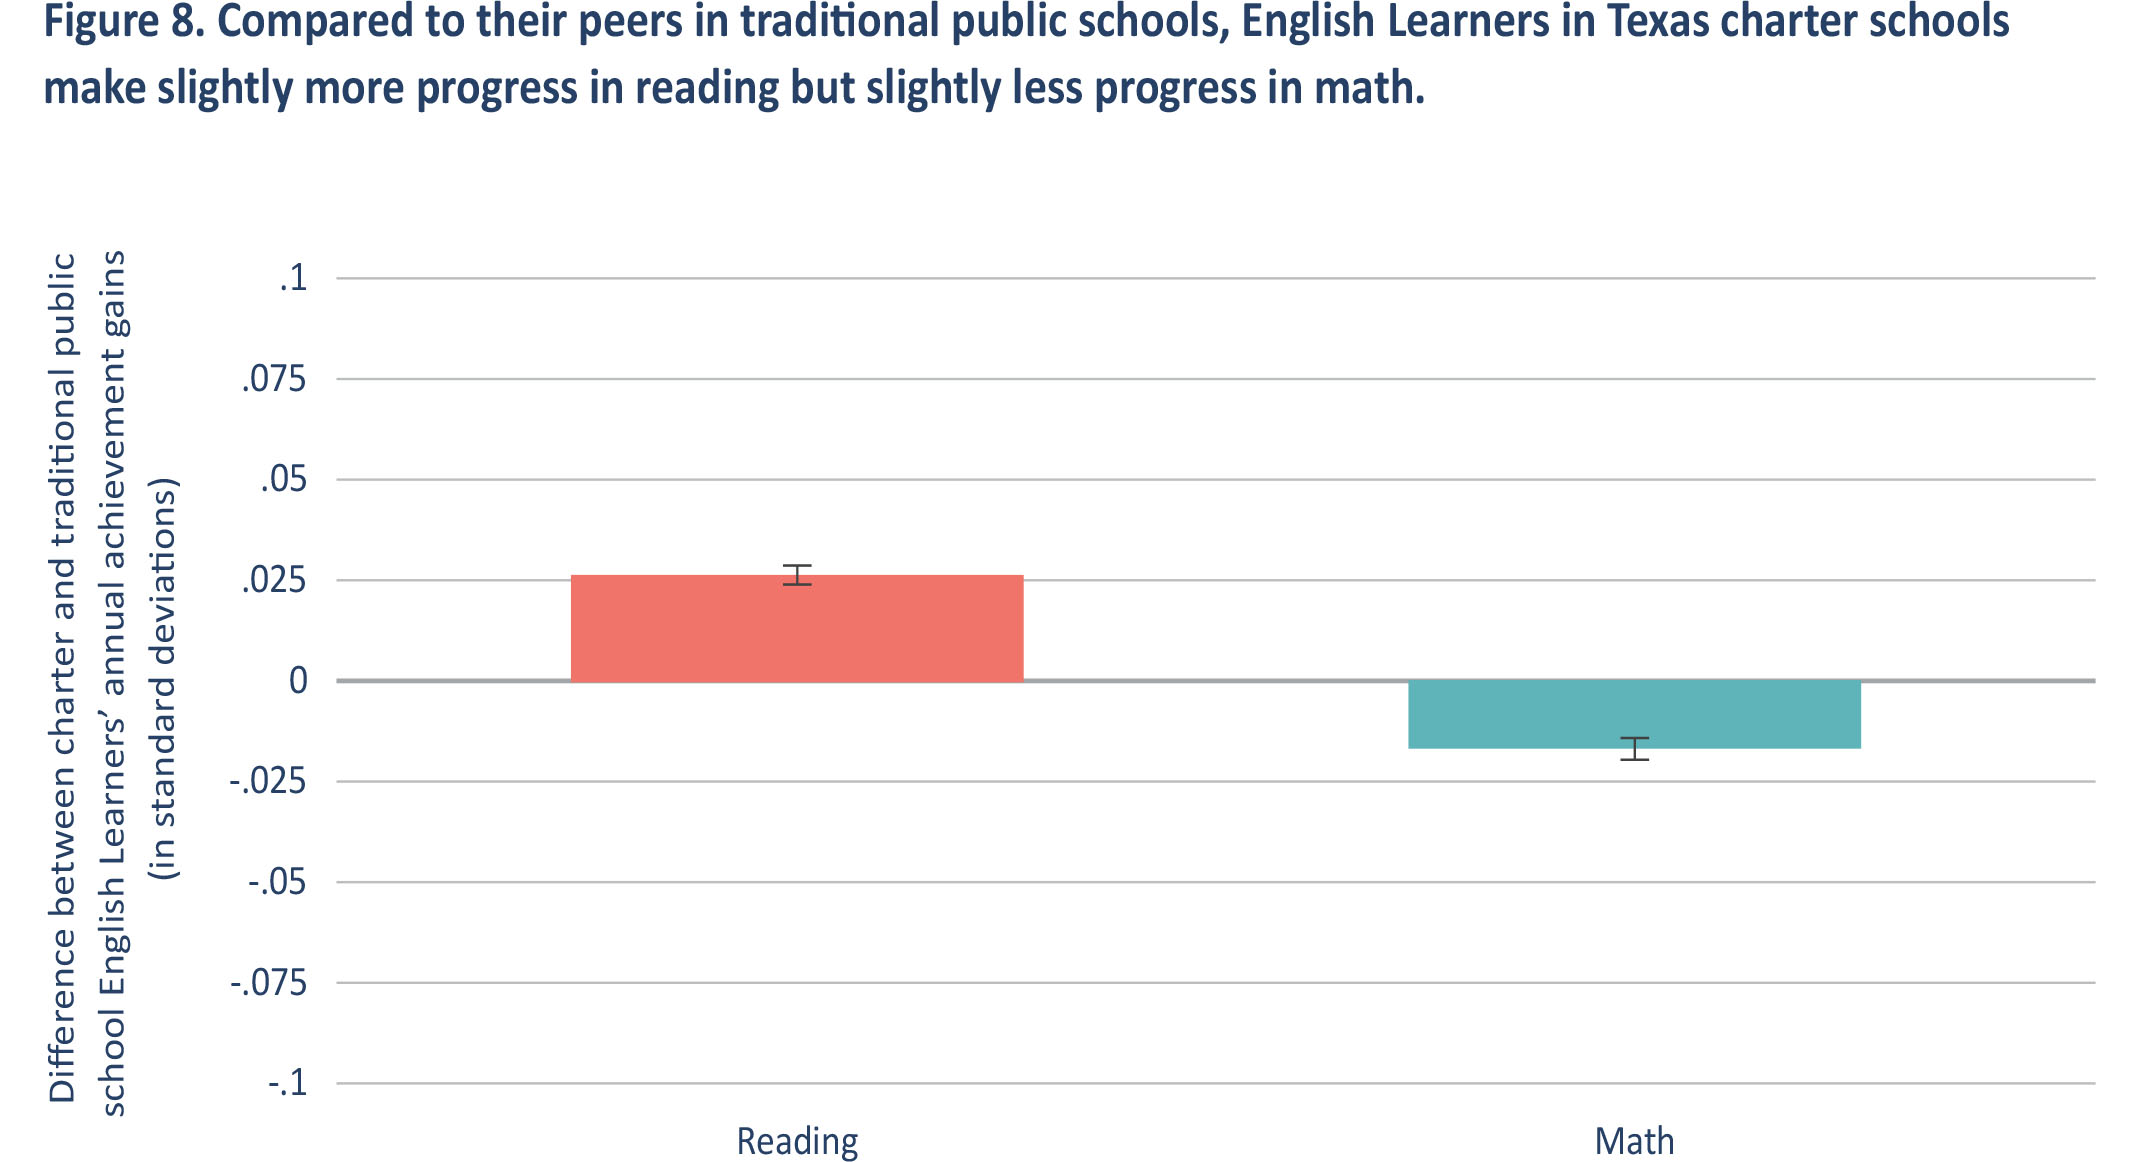 Figure 8. Compared to their peers in traditional public schools, English Learners in Texas charter schools make slightly more progress in reading but slightly less progress in math.